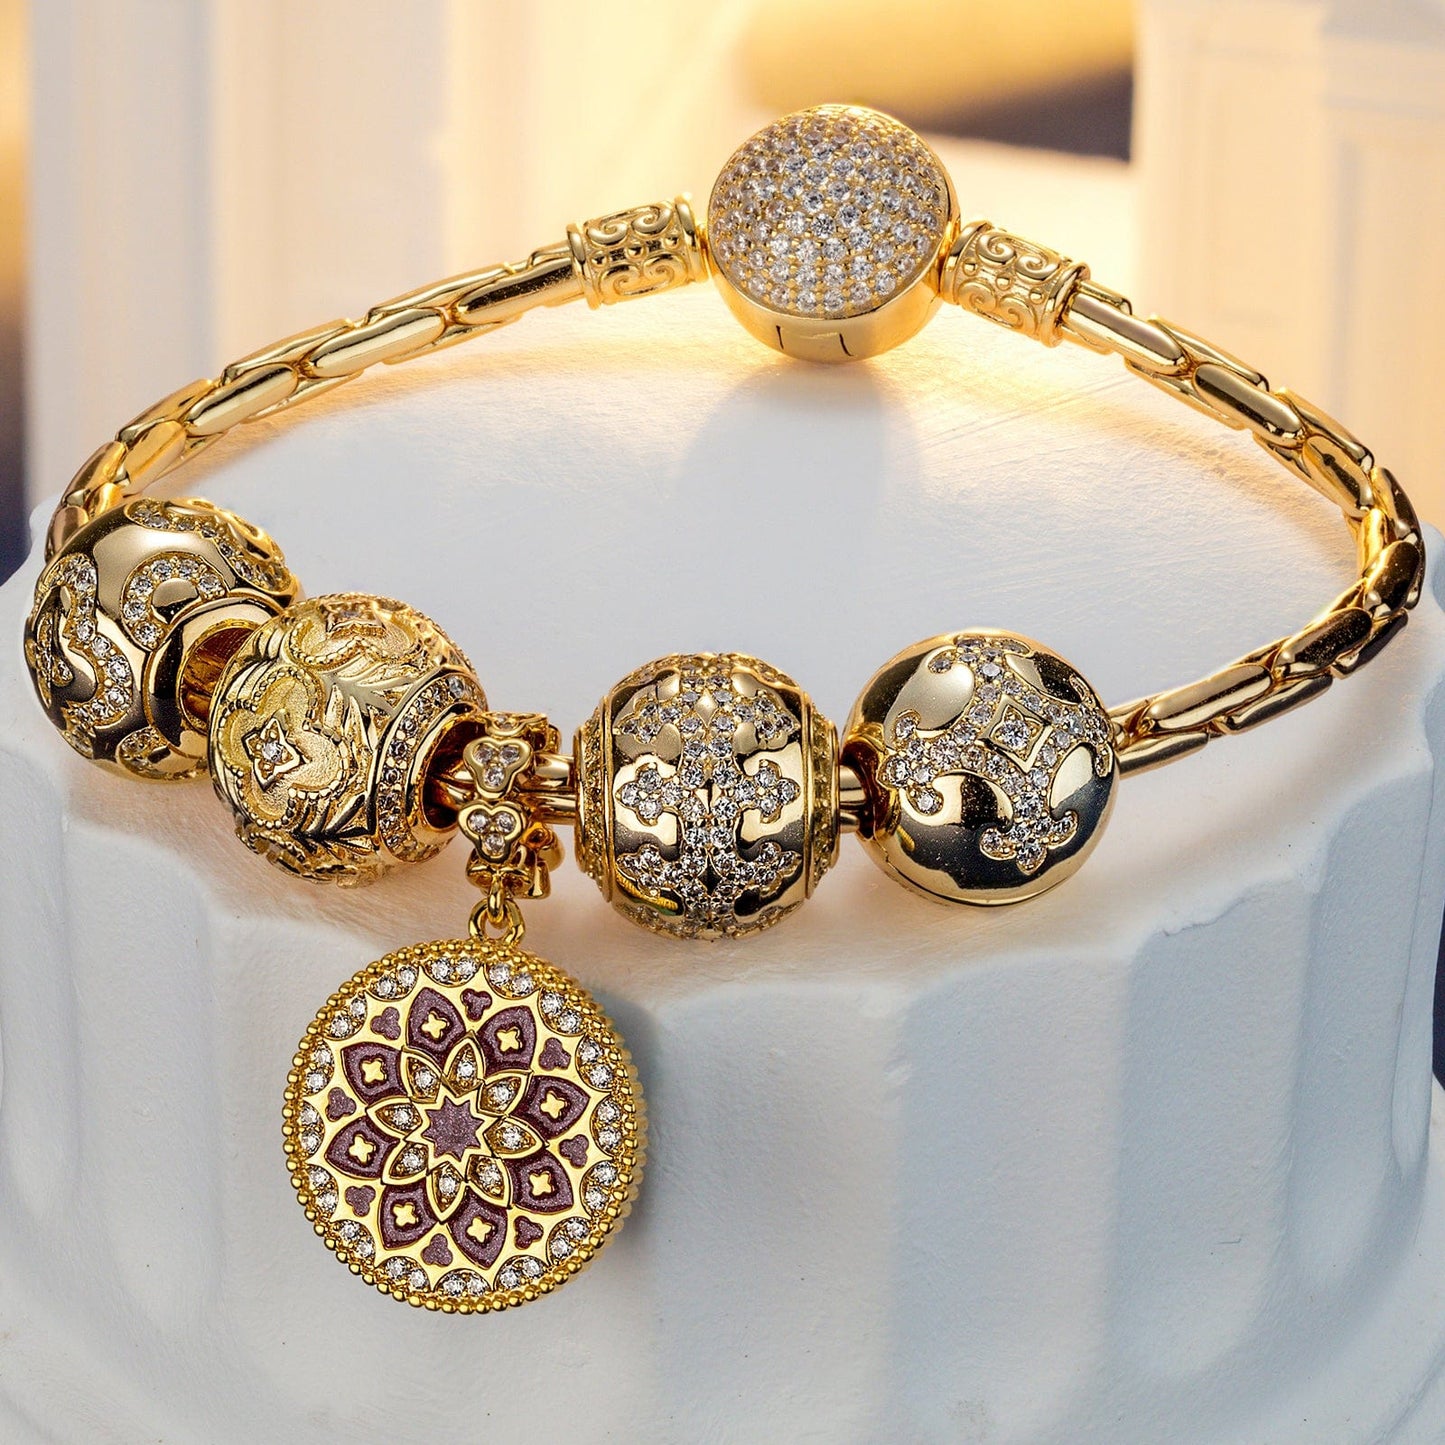 Sterling Silver Cascading Sunlight Charms Bracelet Set With Enamel In 14K Gold Plated